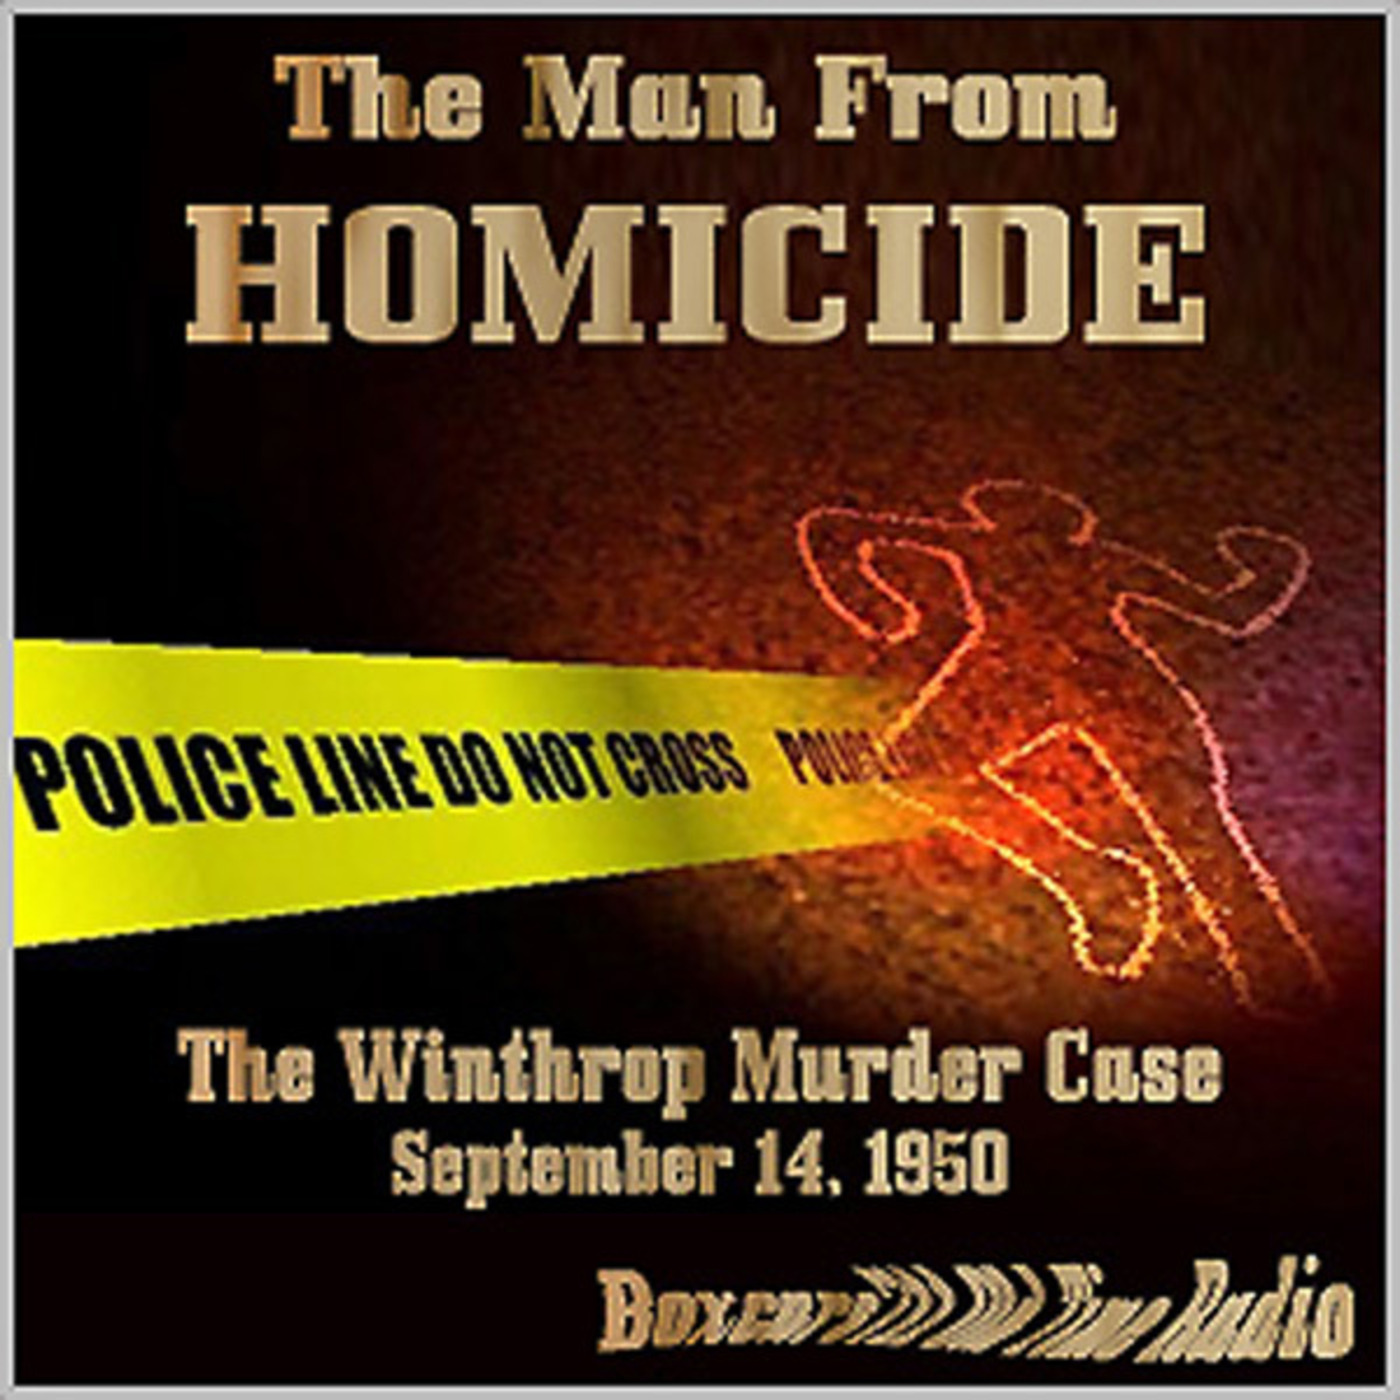 Episode 9644: Man From Homicide - 